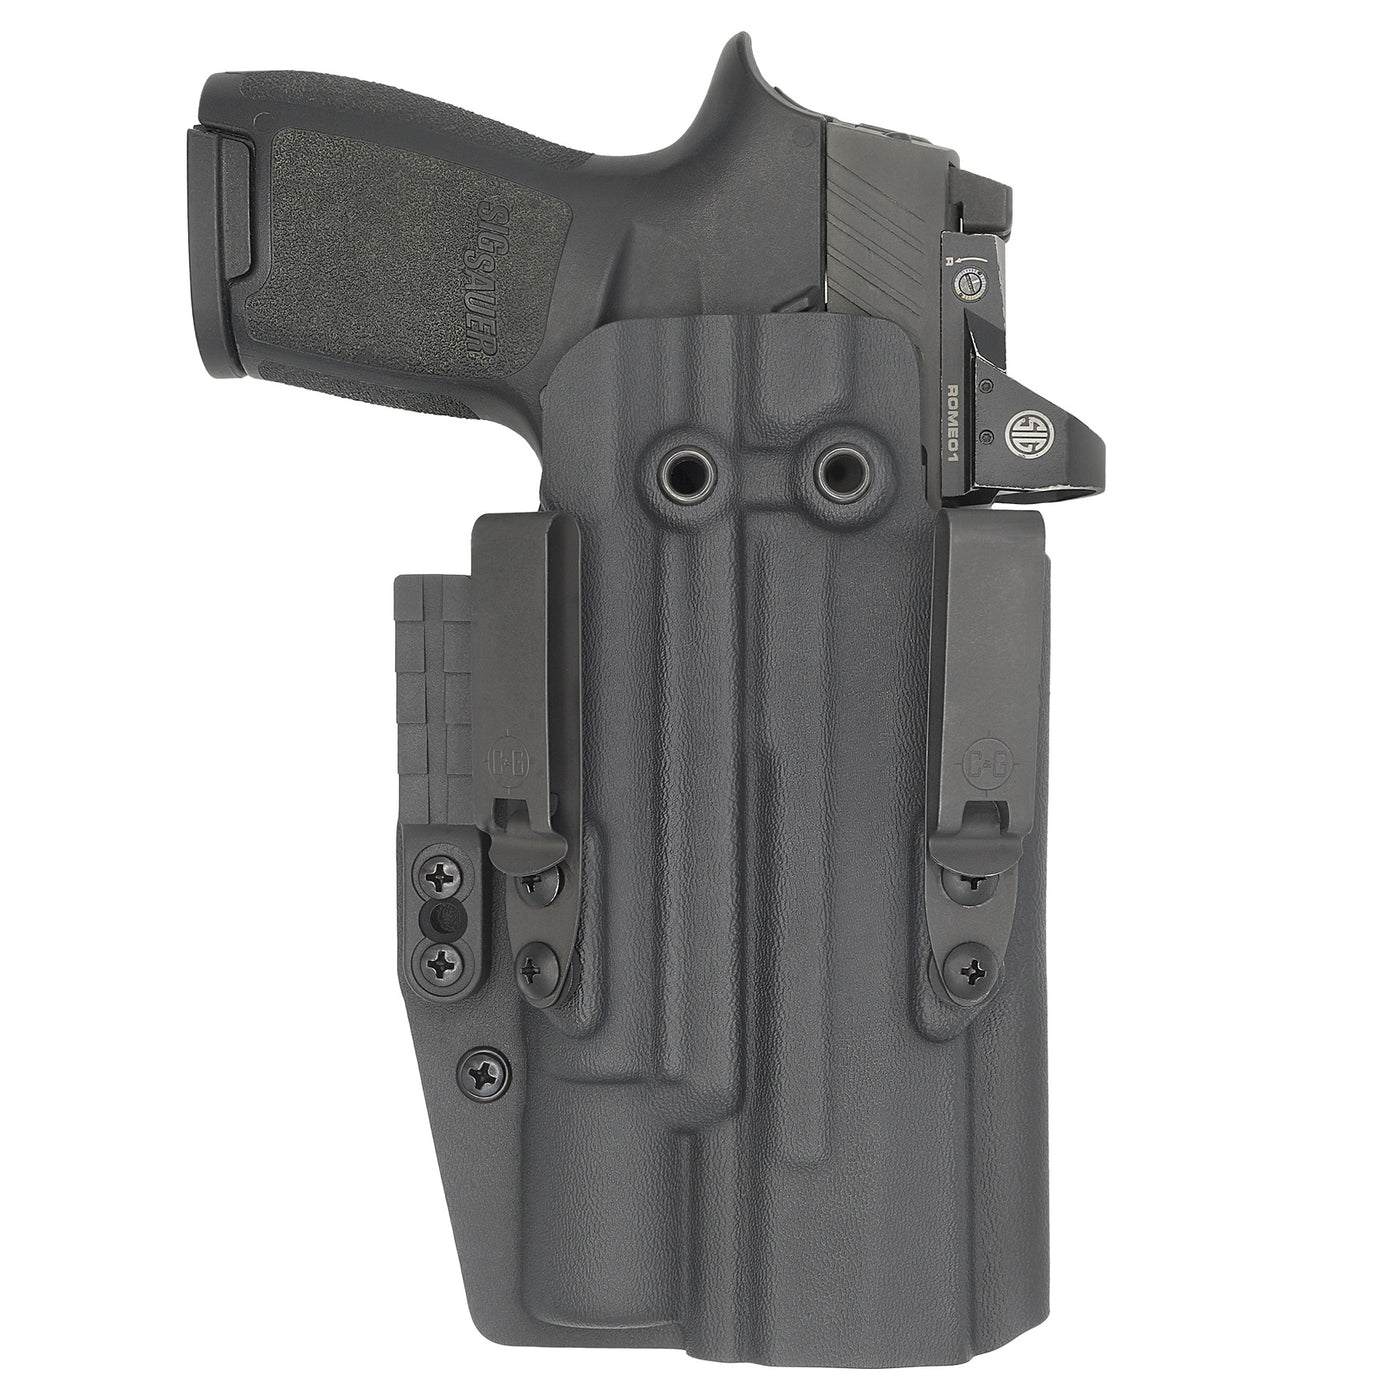 C&G Holsters Quickship IWB ALPHA UPGRADE Tactical H&K 45/c Surefire X300 in holstered position